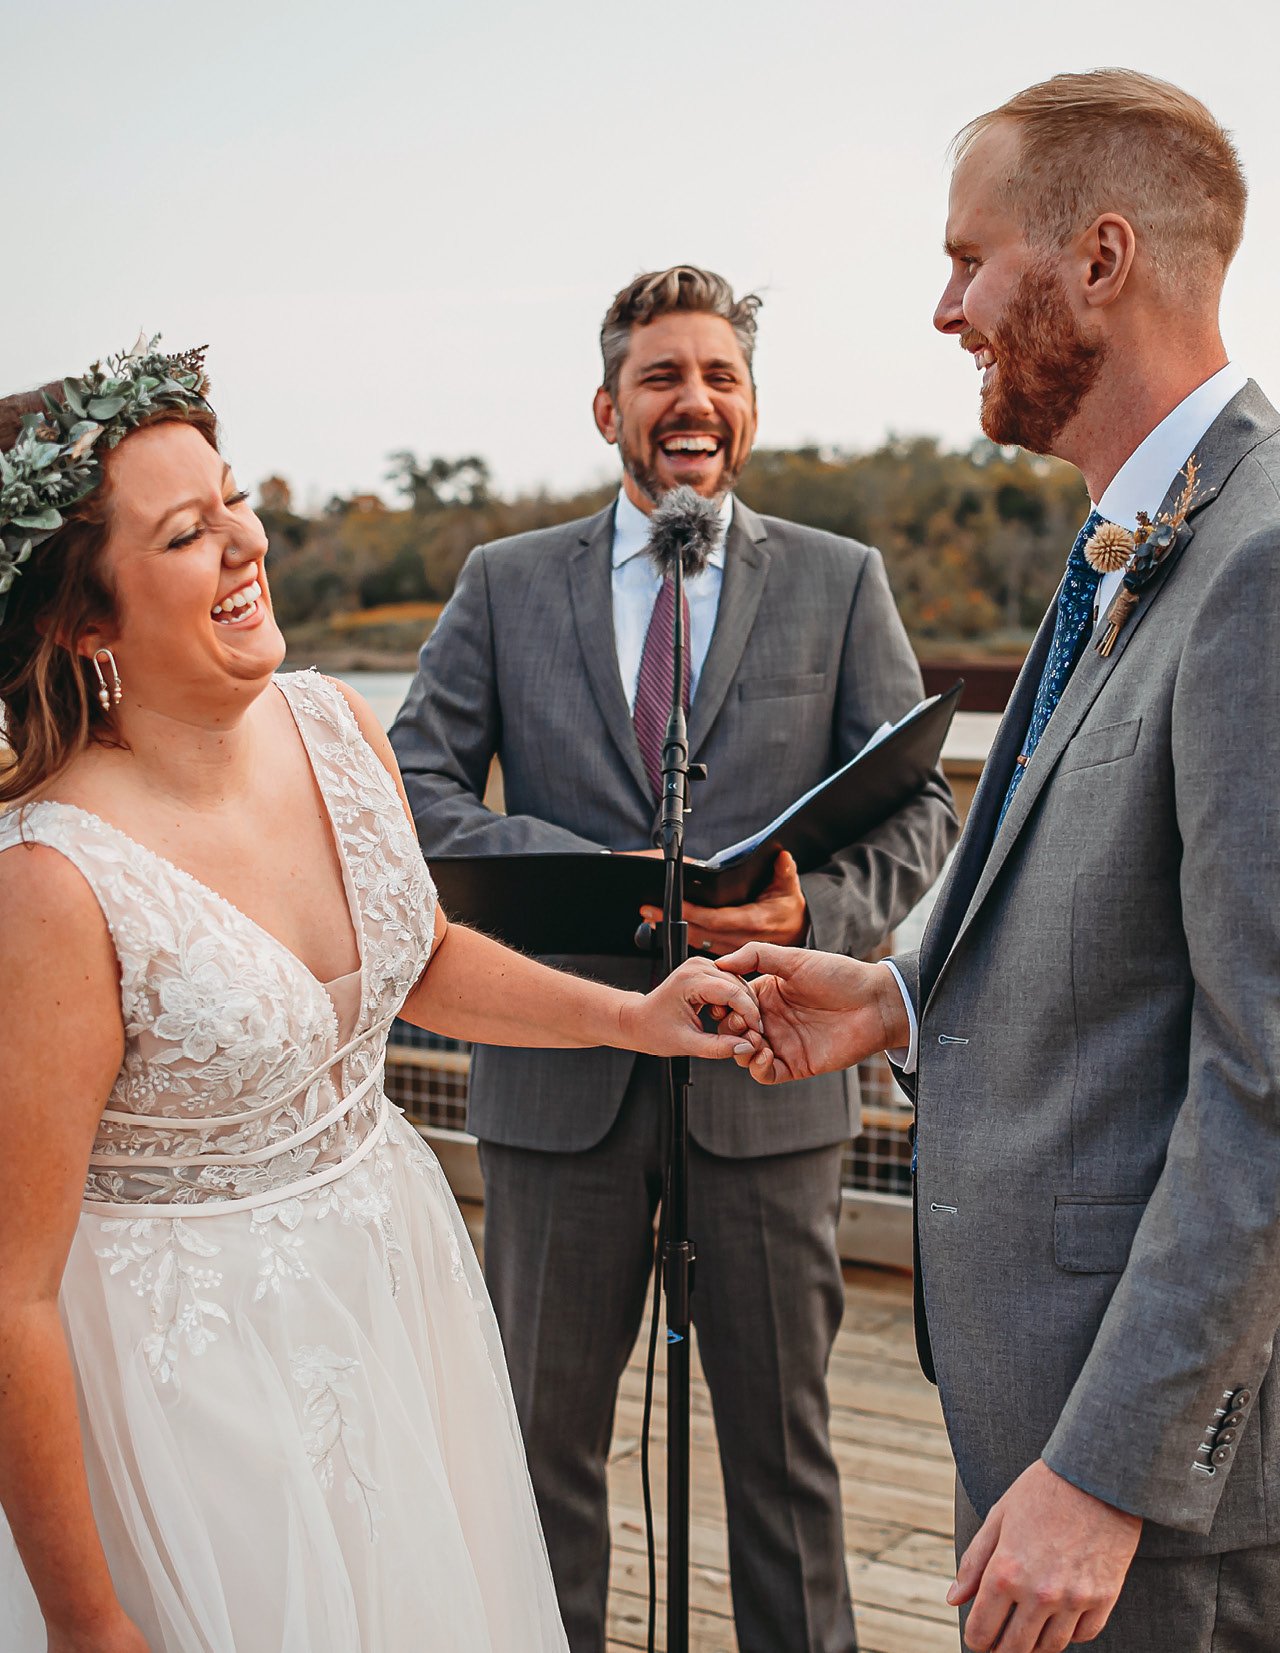 A photo of a bride and groom and their officiant on a dock, all laughing